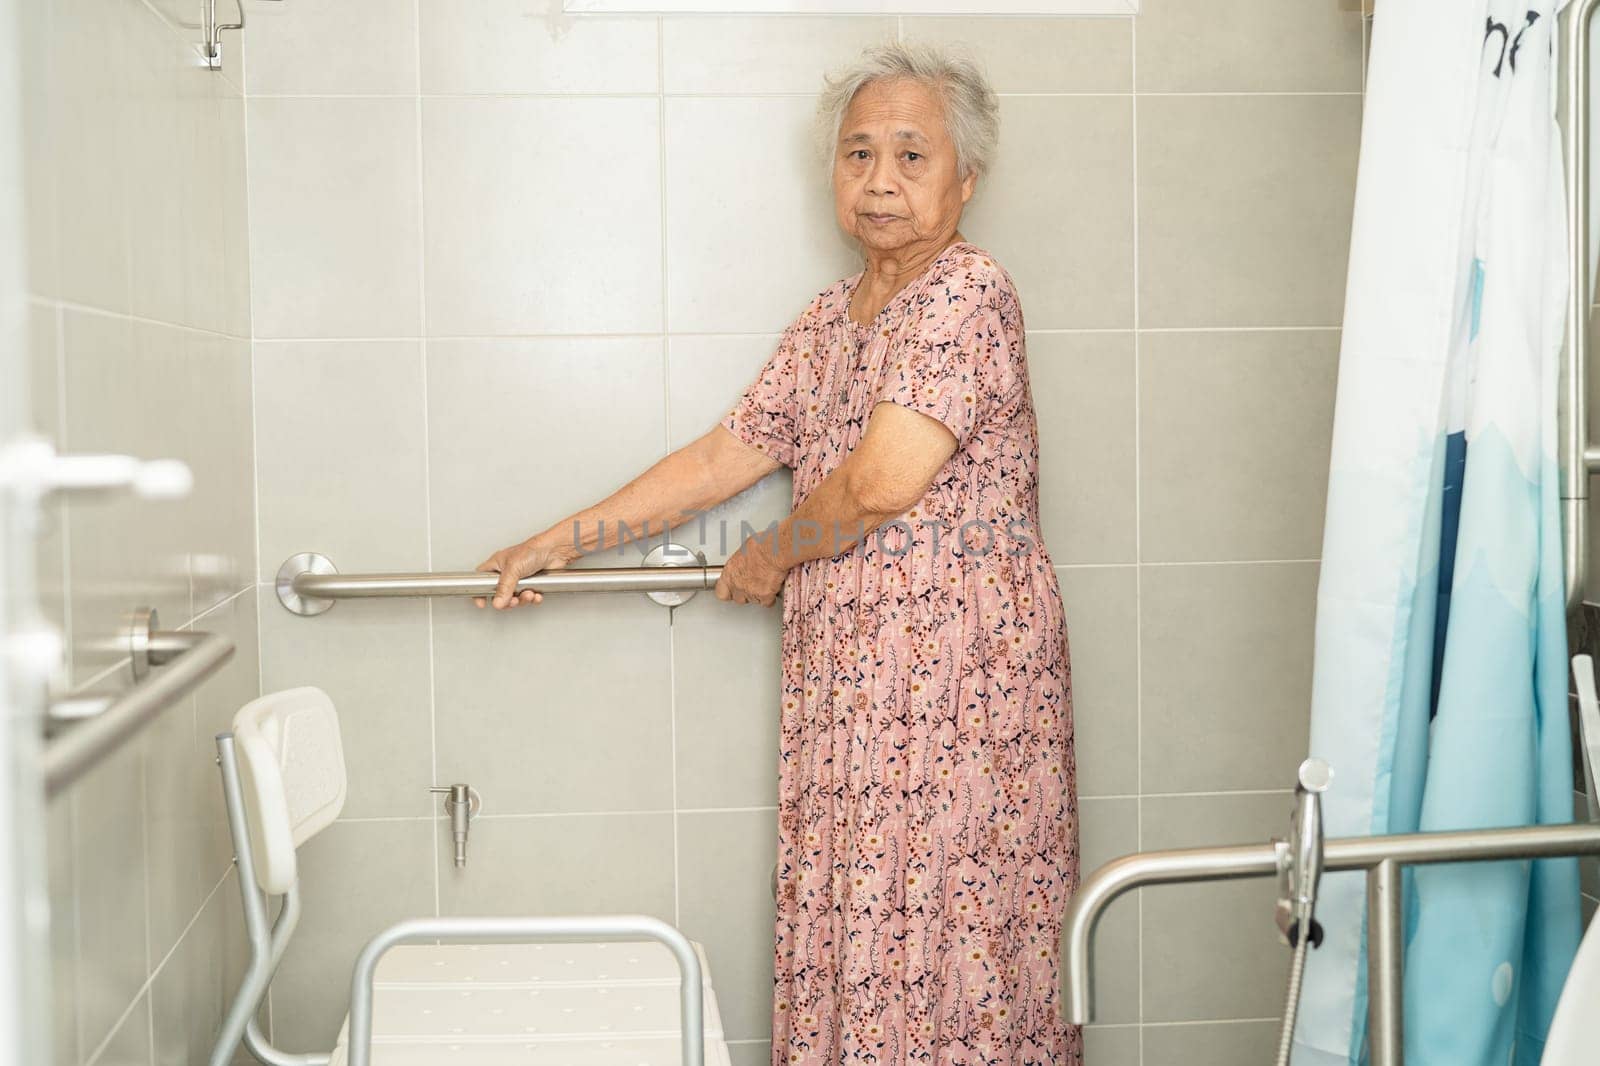 Asian senior or elderly old lady woman patient use toilet bathroom handle security in nursing hospital, healthy strong medical concept.